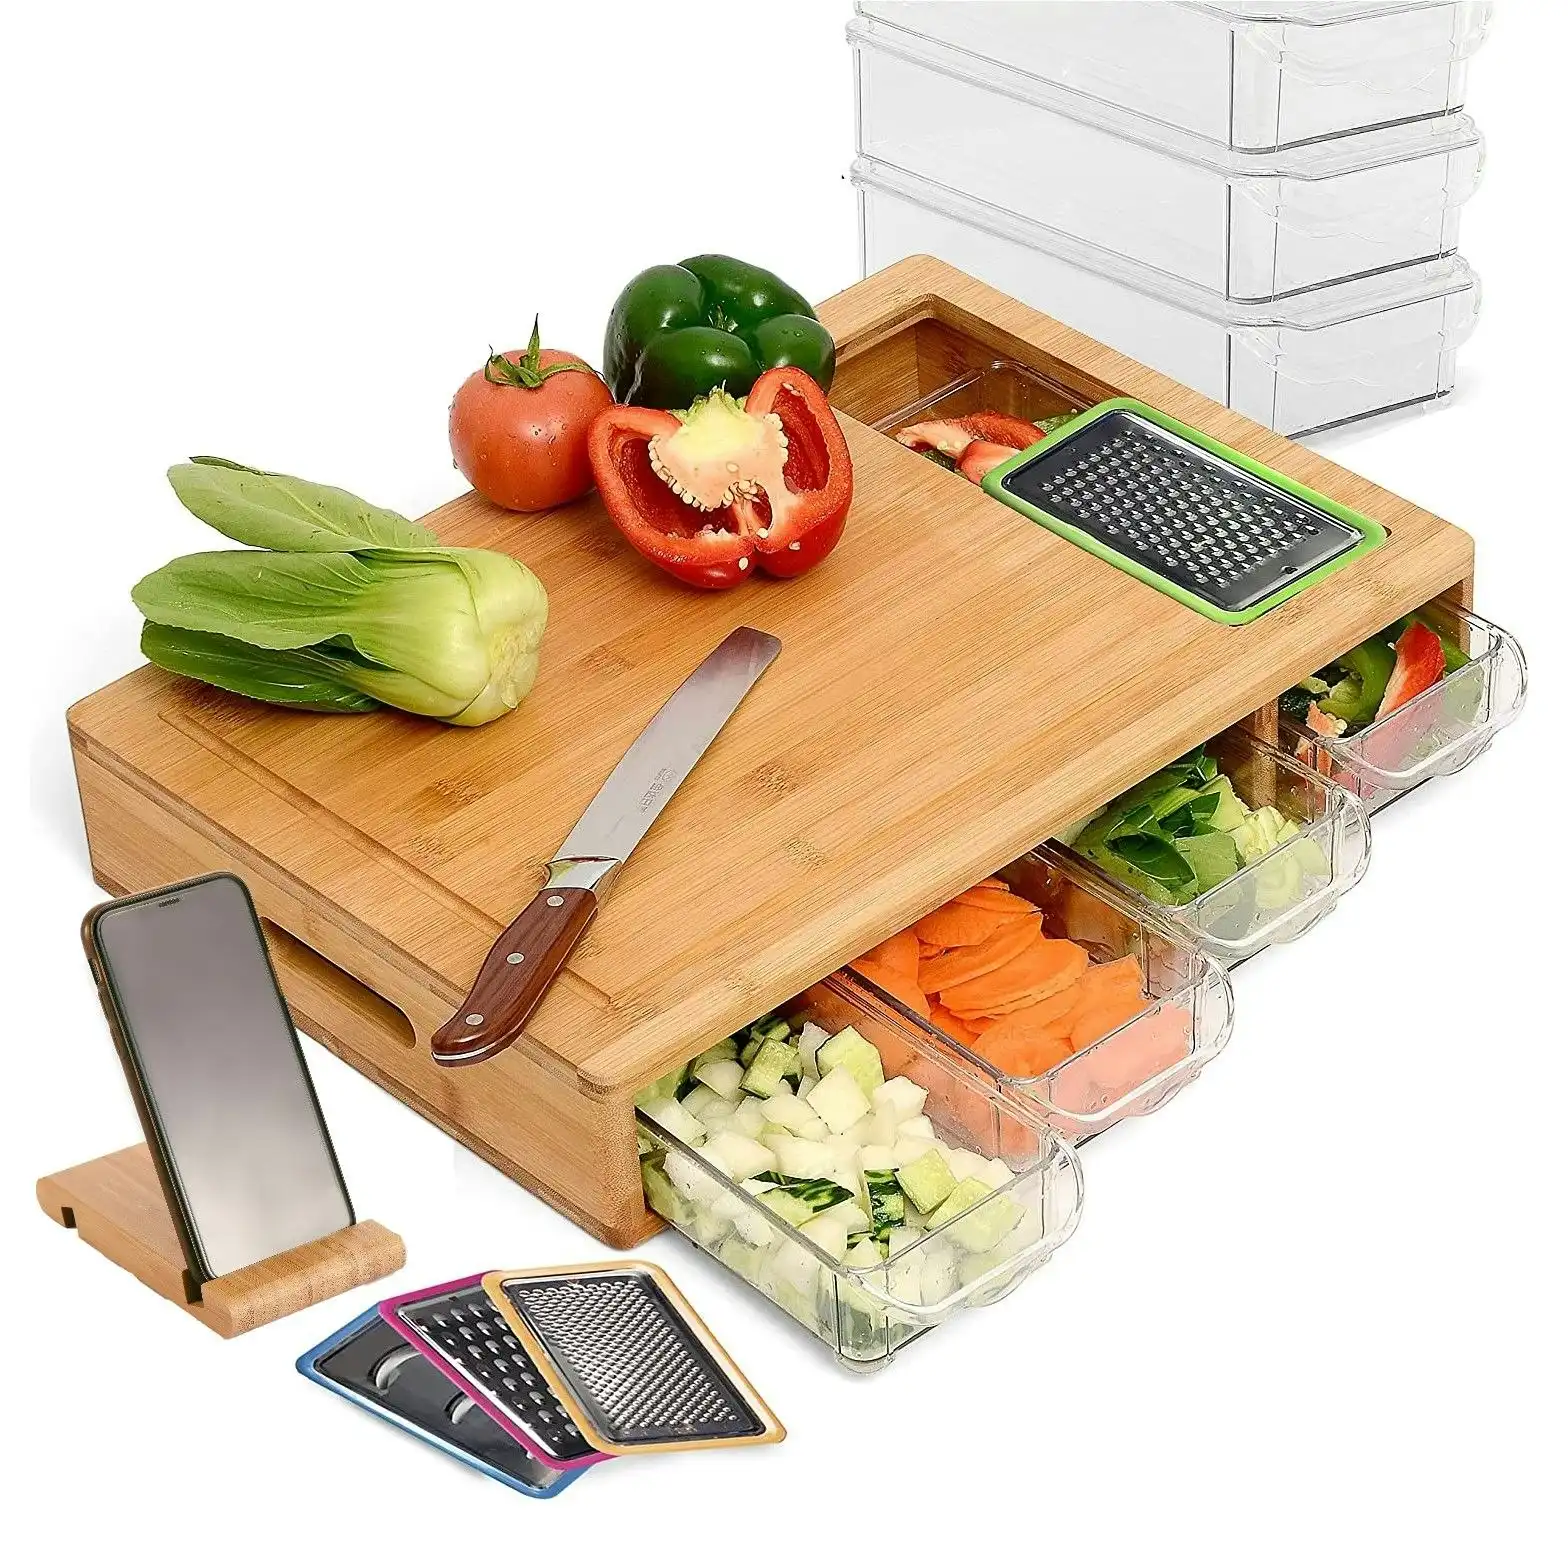 Carla Home Large Bamboo Cutting Board and 4 Containers with Mobile Holder gift included for Home Kitchen